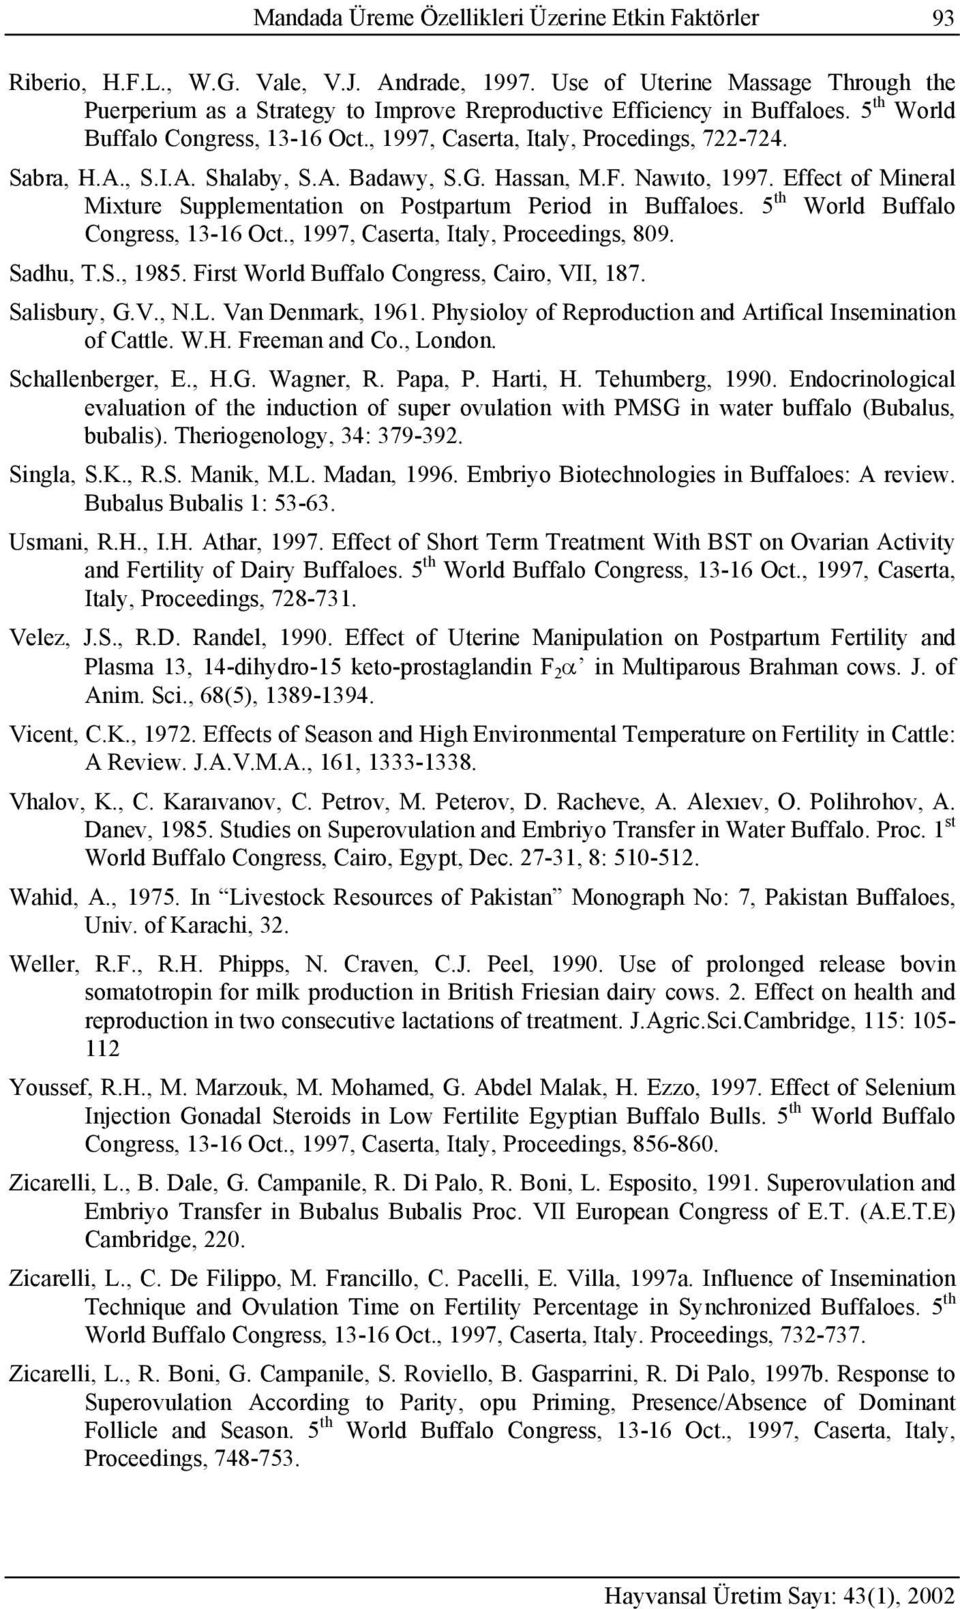 Sabra, H.A., S.I.A. Shalaby, S.A. Badawy, S.G. Hassan, M.F. Nawıto, 1997. Effect of Mineral Mixture Supplementation on Postpartum Period in Buffaloes. 5 th World Buffalo Congress, 13-16 Oct.